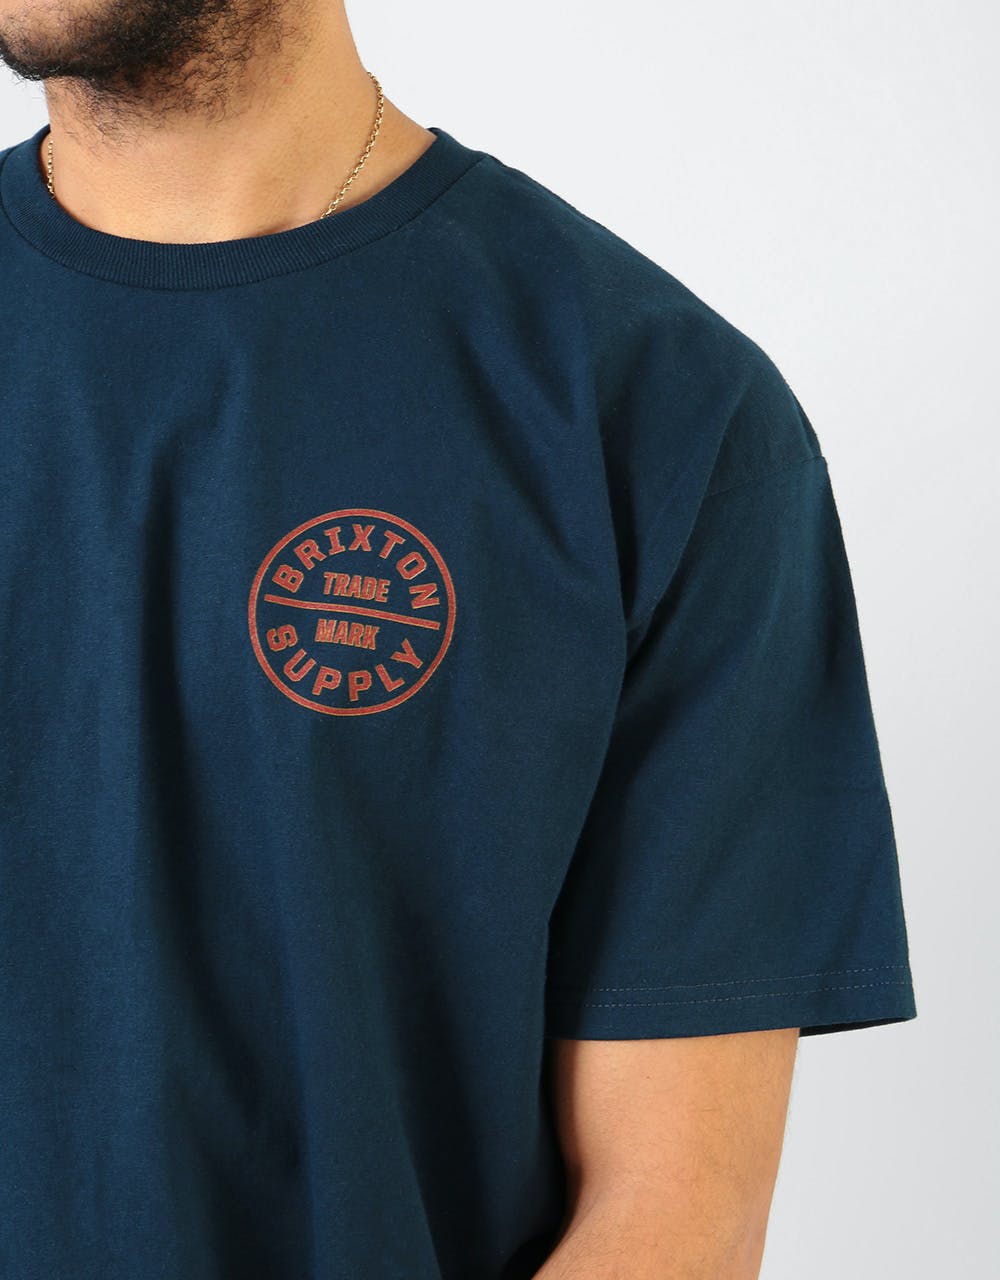 Brixton Oath T-Shirt - Navy/Red